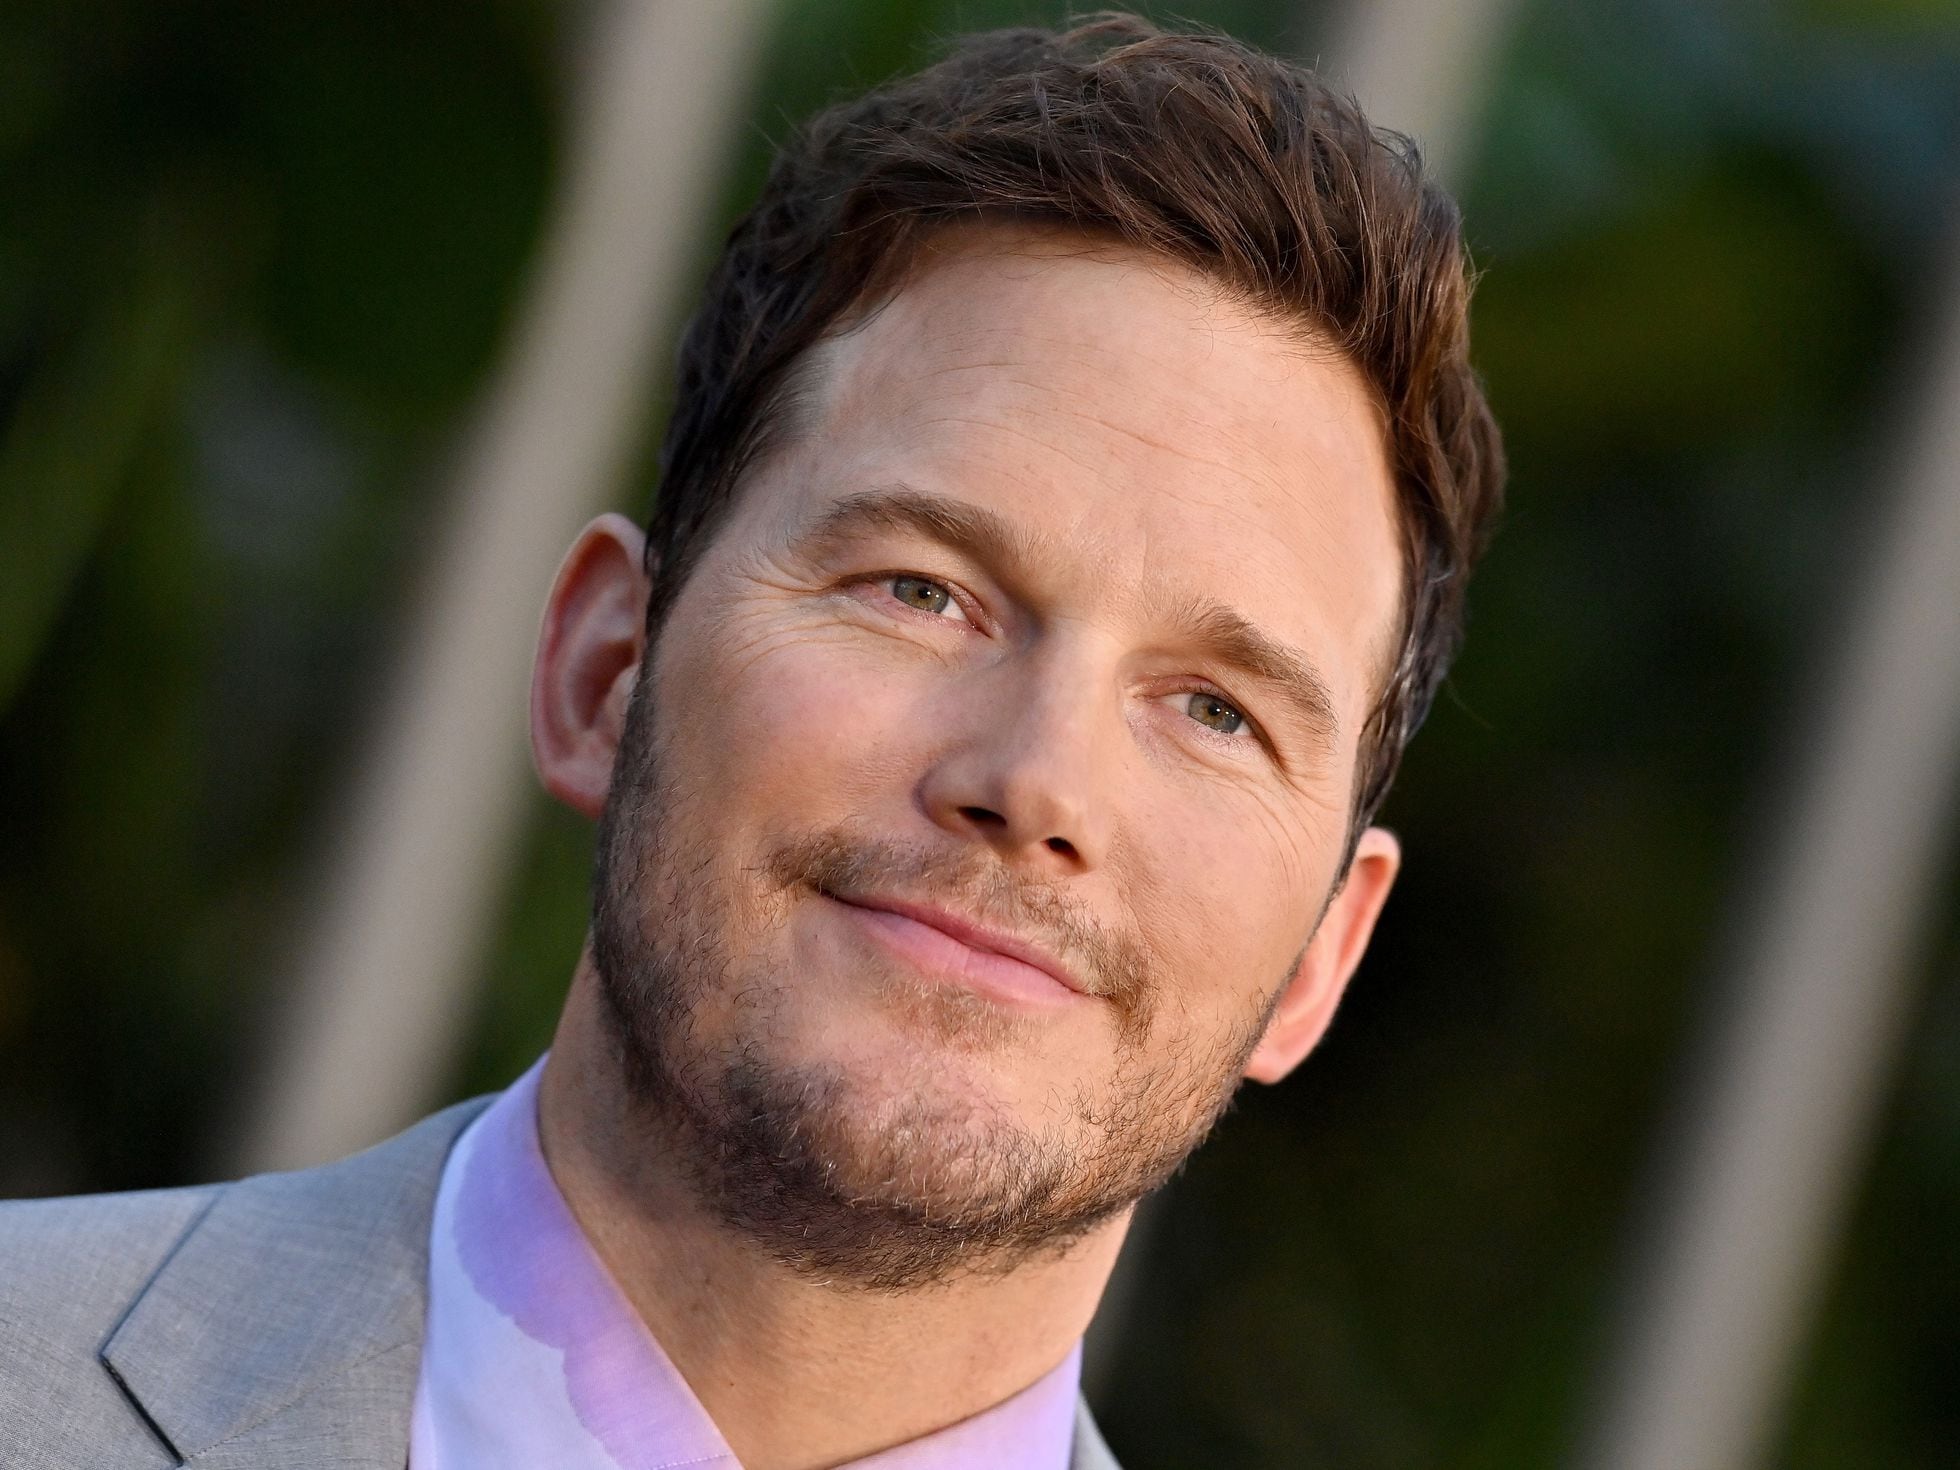 Chubby Mom Fuck Young - One has to go': How Chris Pratt became the least liked of all of  Hollywood's actors named Chris | Culture | EL PAÃS English